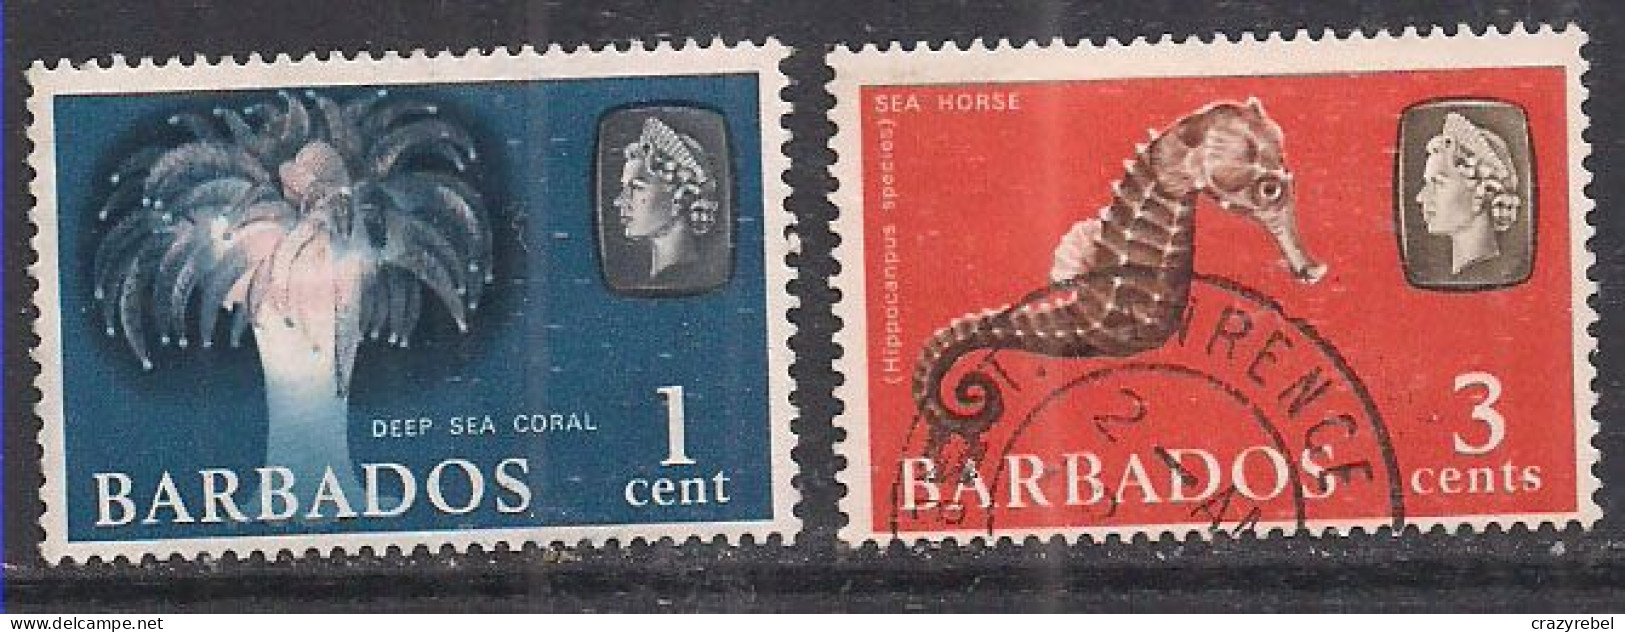 Barbados 1965 QE2 Pr 1+3cents CoralSG 322/24 MH+used ( J1071 ) - Bahrein (...-1965)